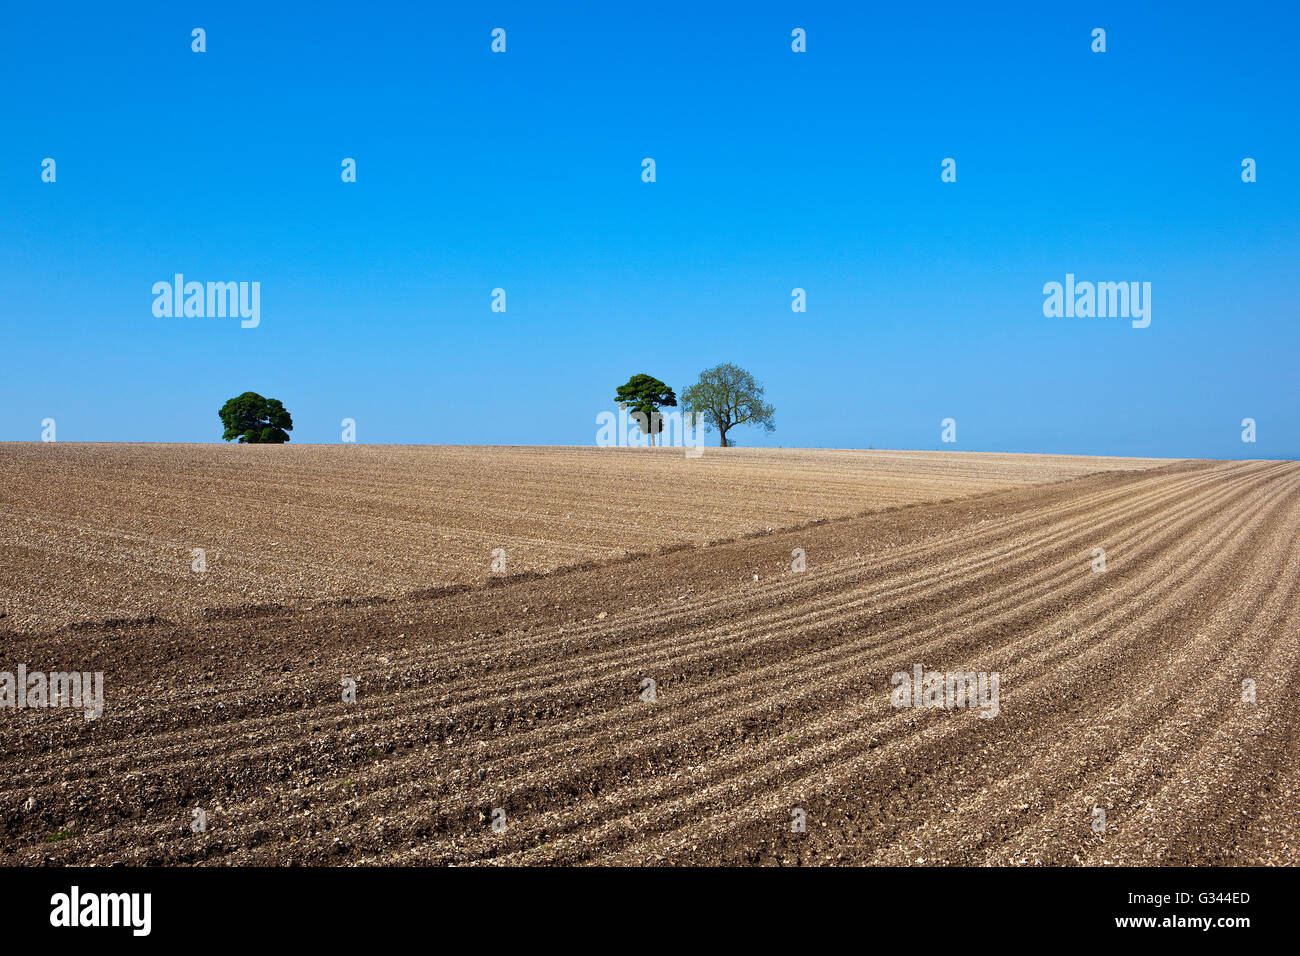 Chalky cultivated soil with furrows for growing potato crops on a Yorkshire wolds hillside field with trees under a blue sky Stock Photo